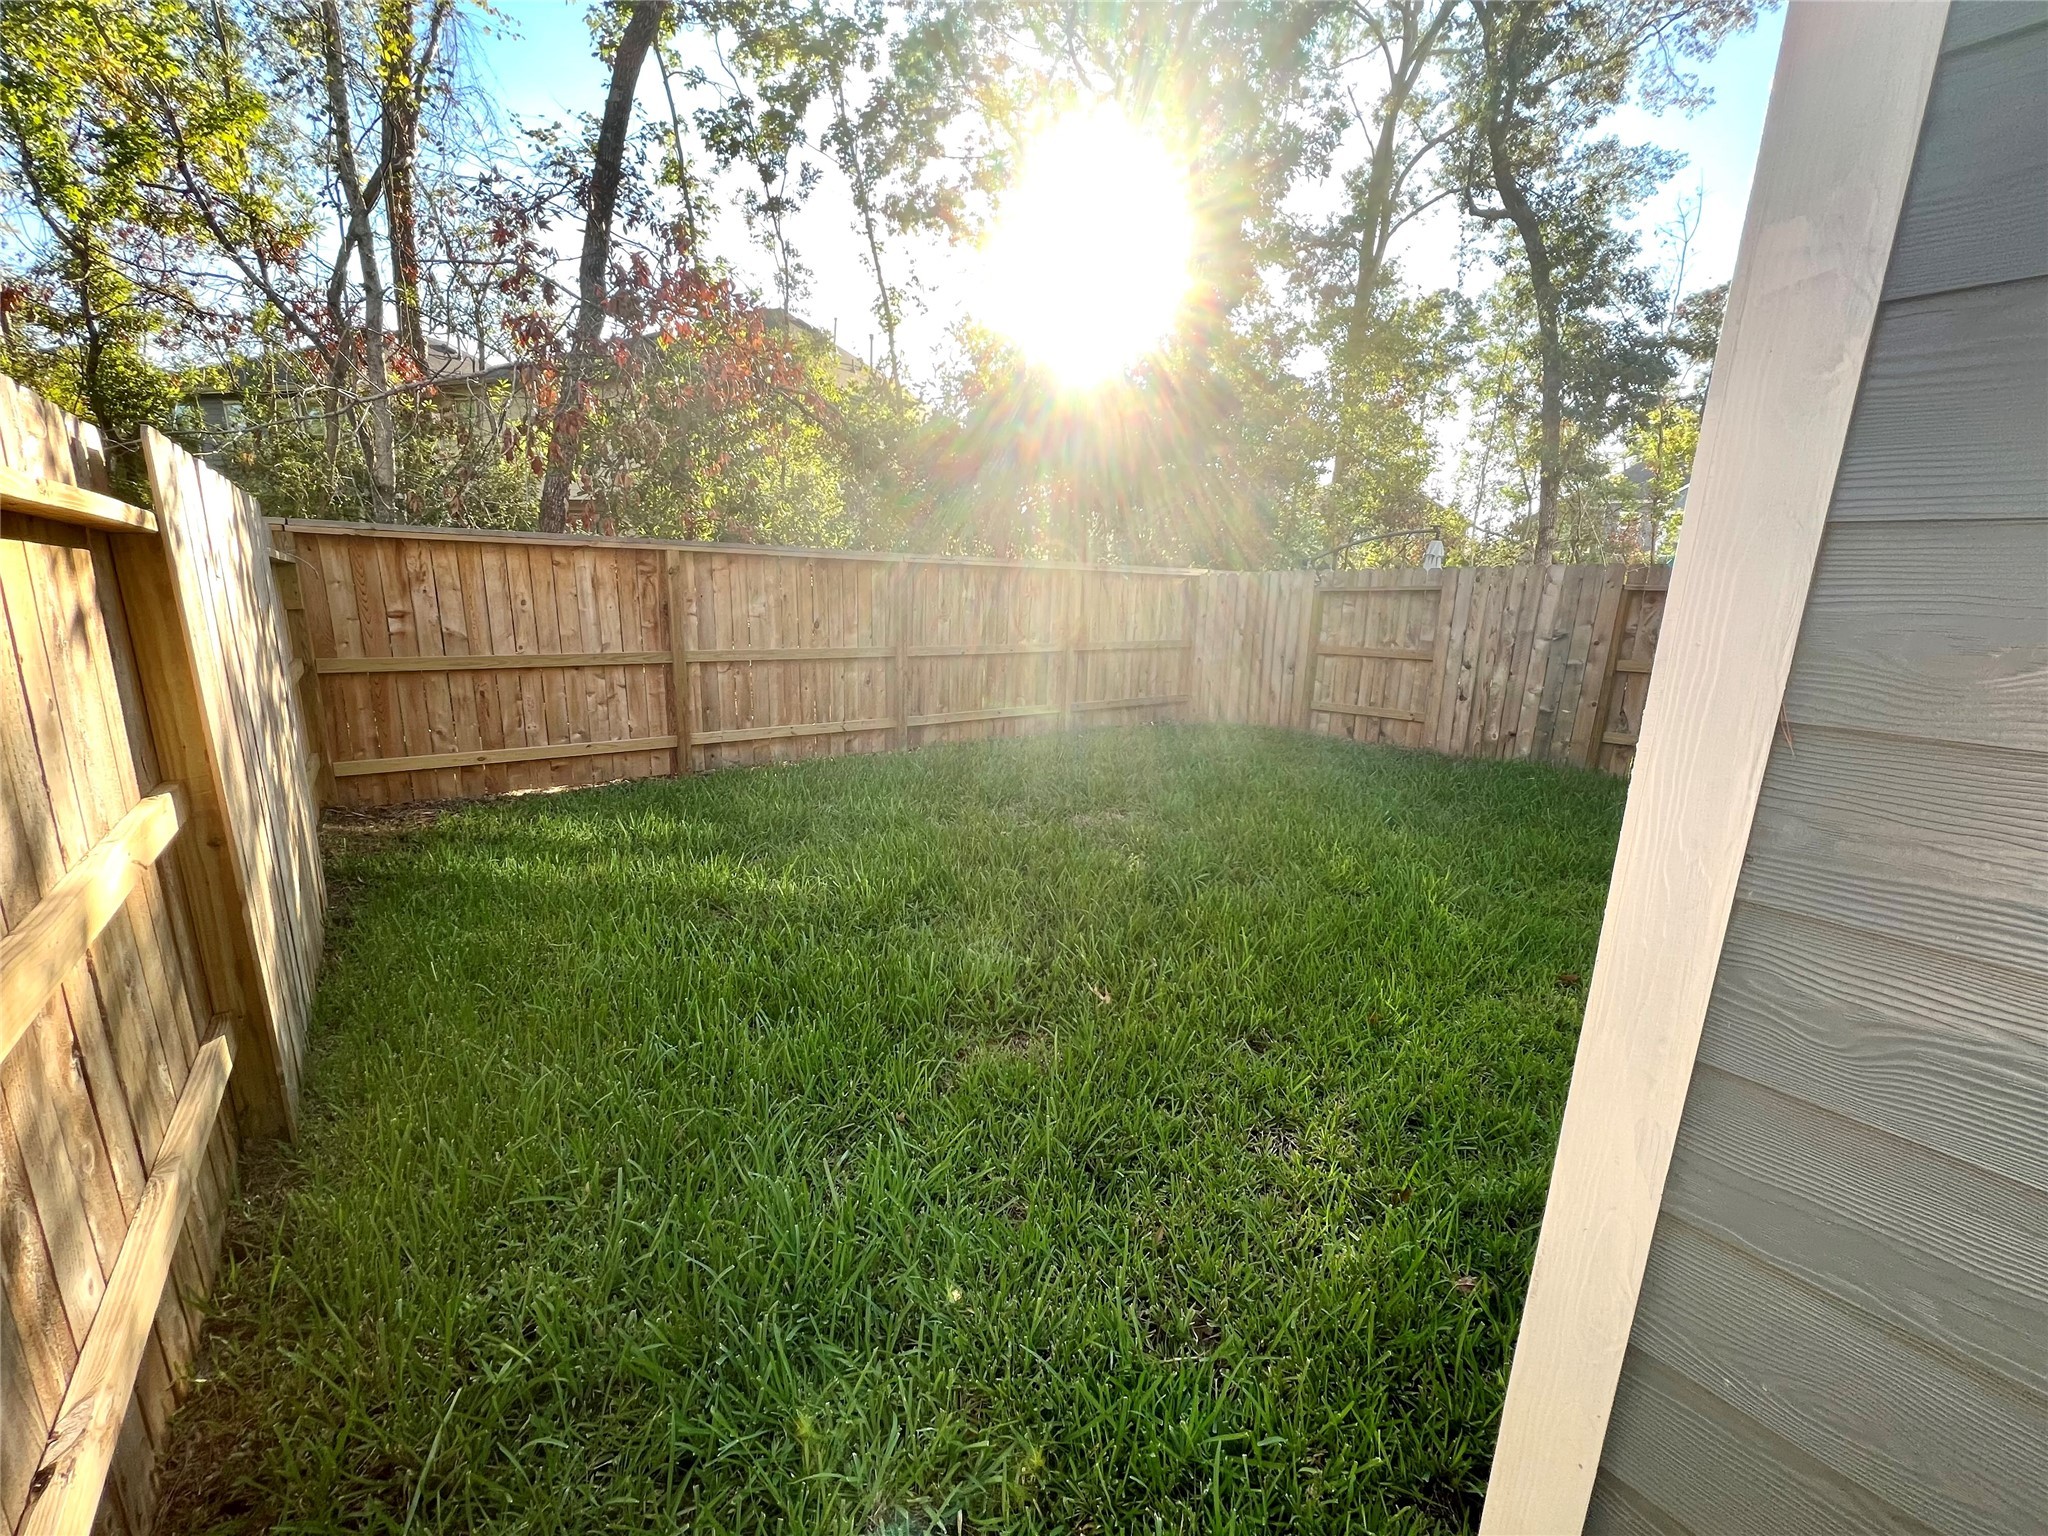 Backyard is spacious and fenced.